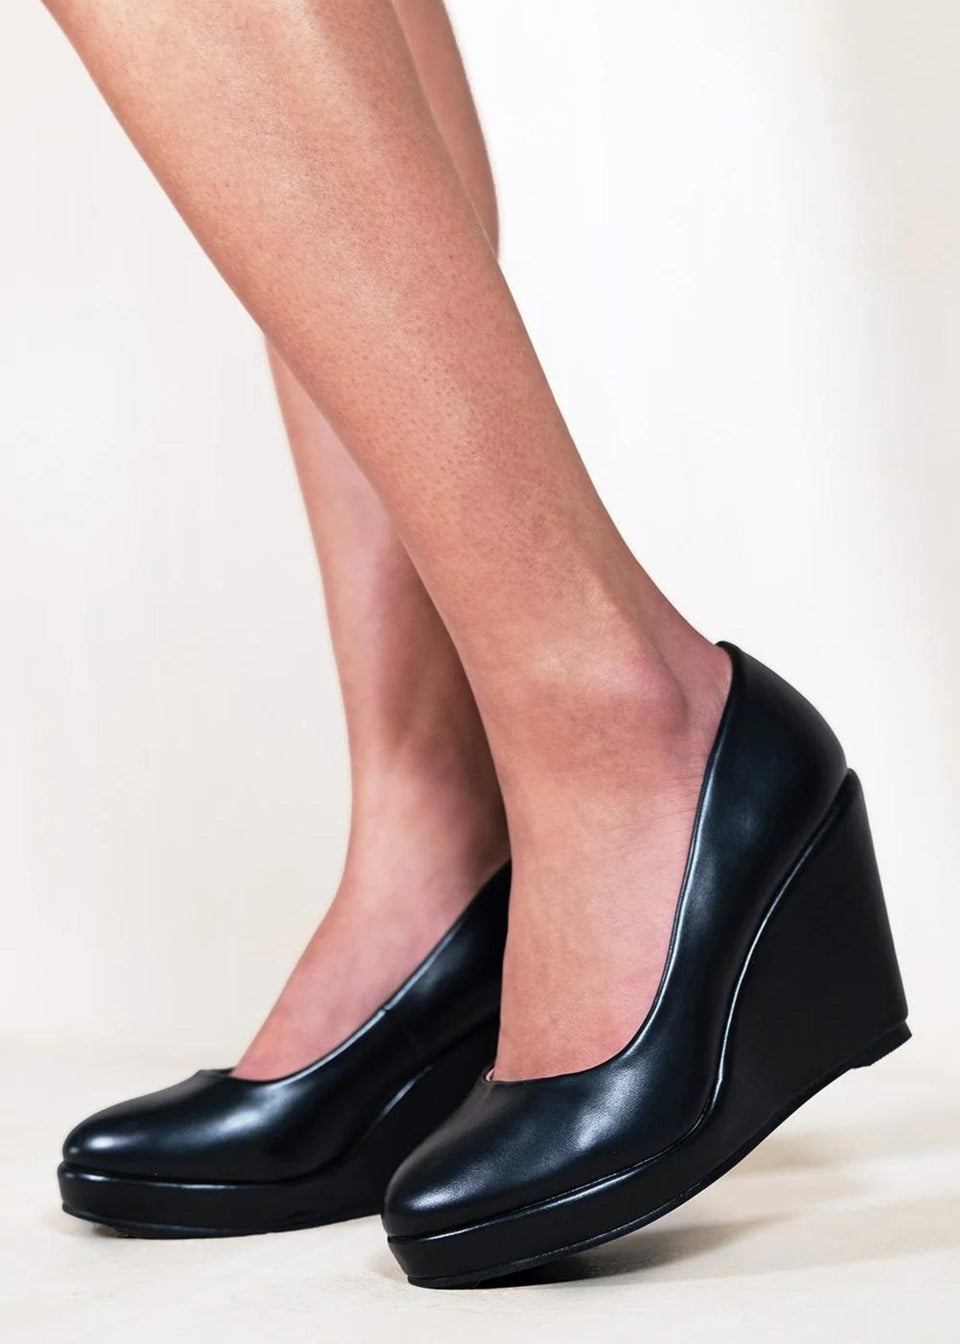 Where's That From Black Pu Luisa Platform Wedge Court Shoes